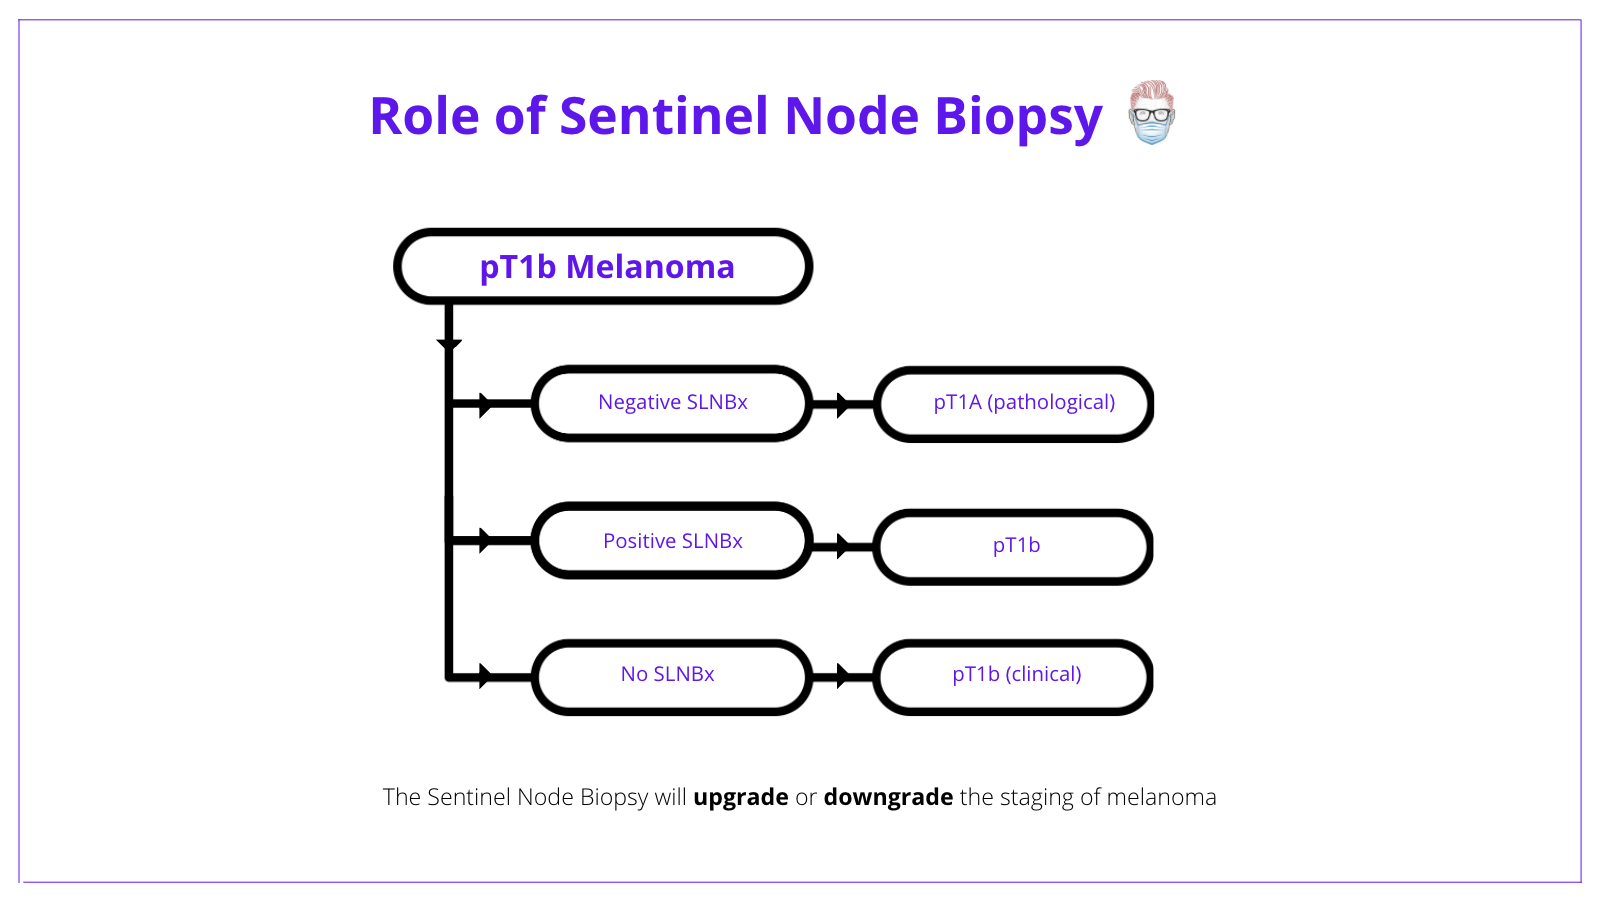 The below image conceptualizes the role of sentinel node biopsy in treating melanoma.